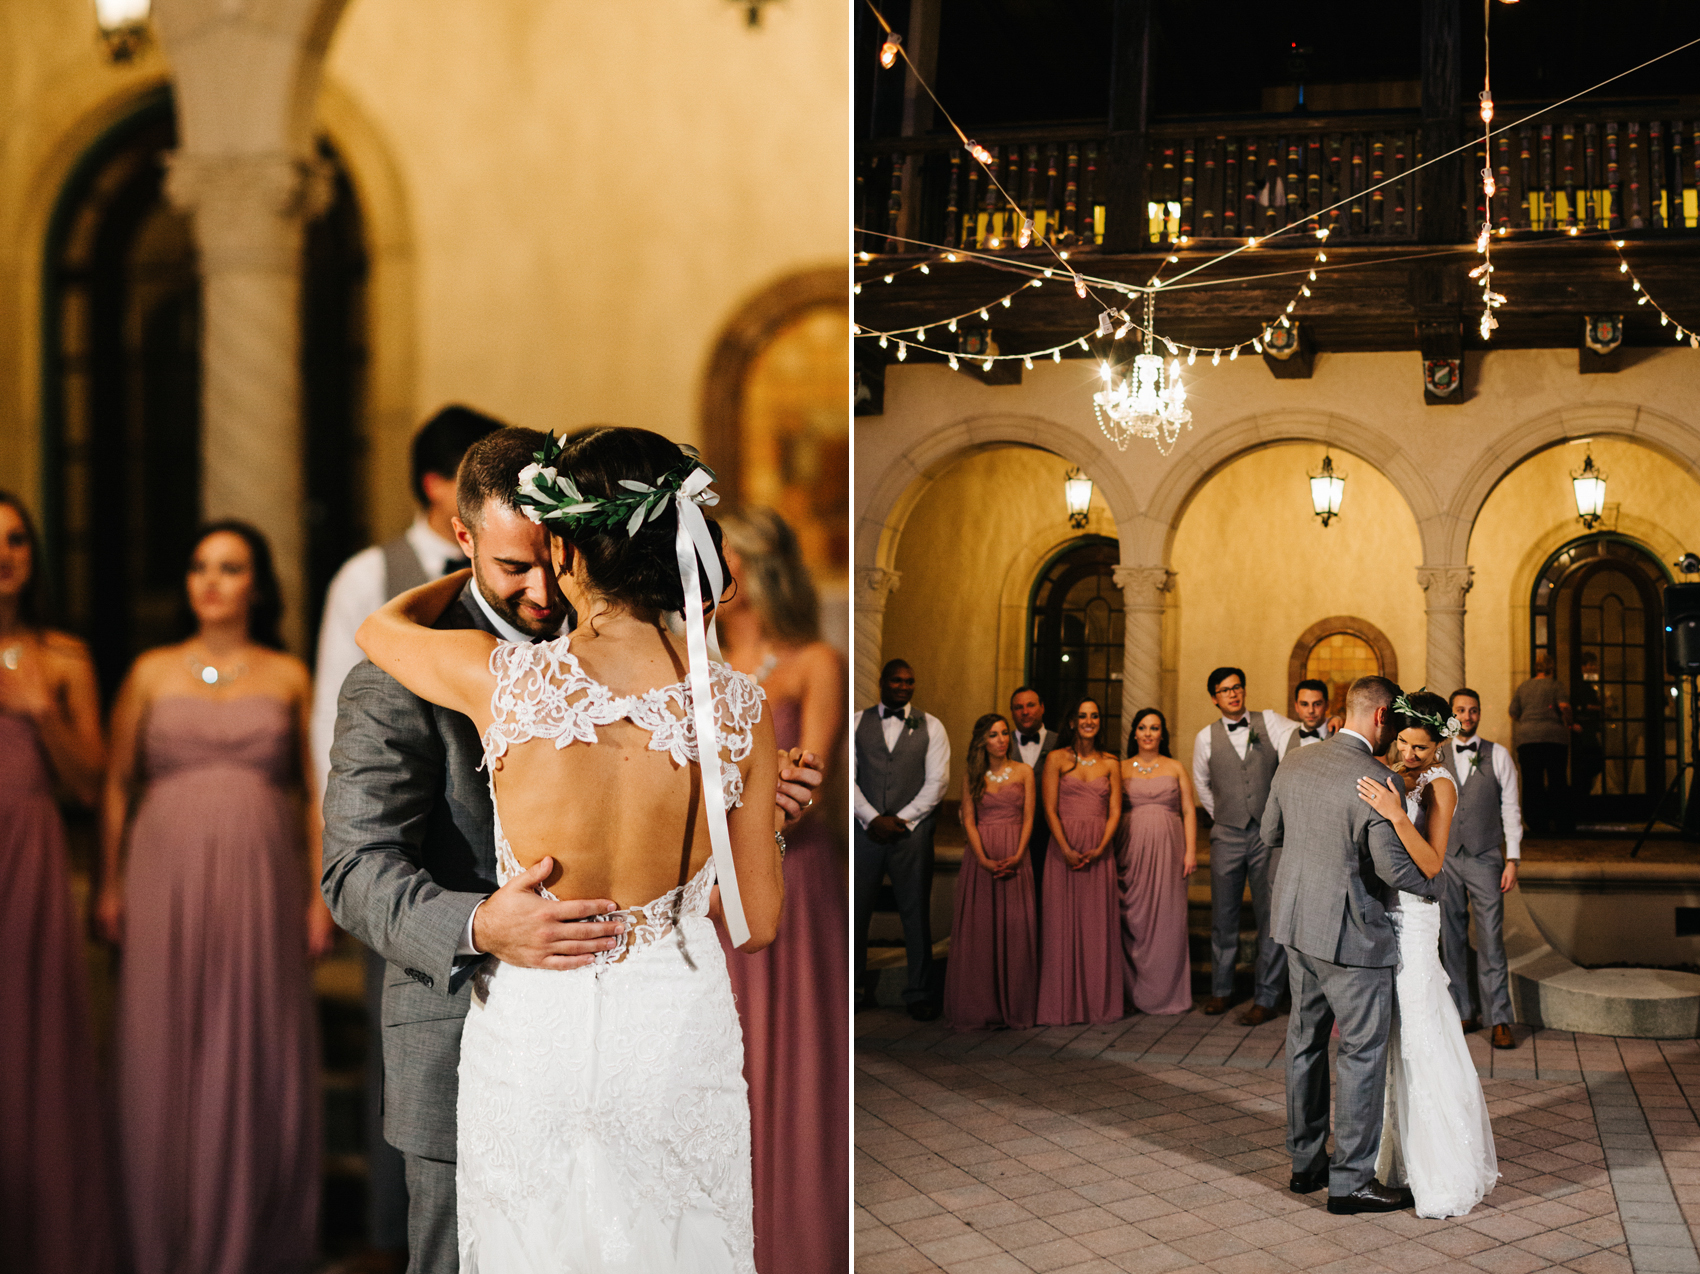 Romantic first dance under the twinkle lights in Florida wedding